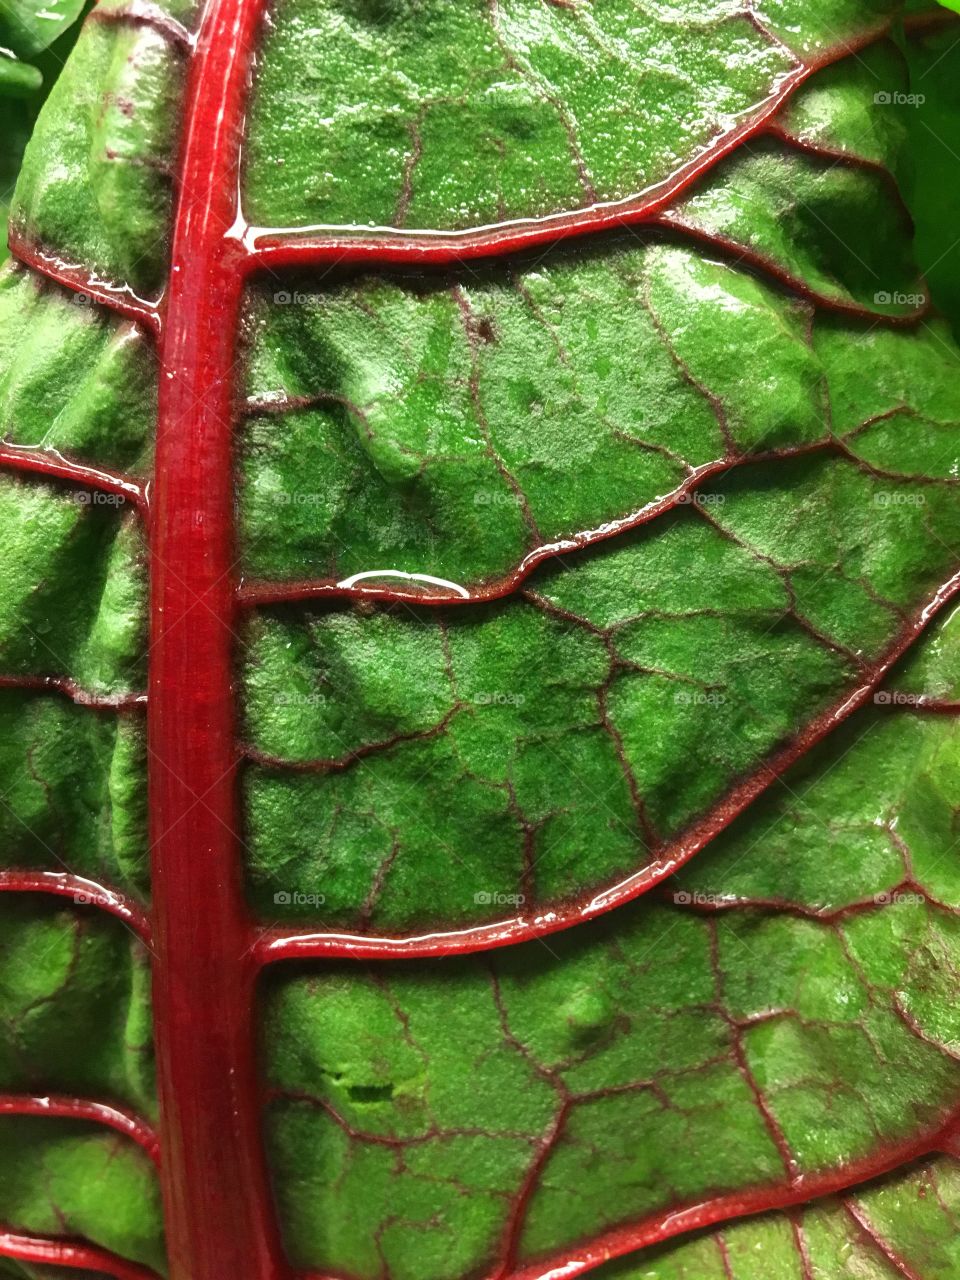 Texture in a  vegetable 